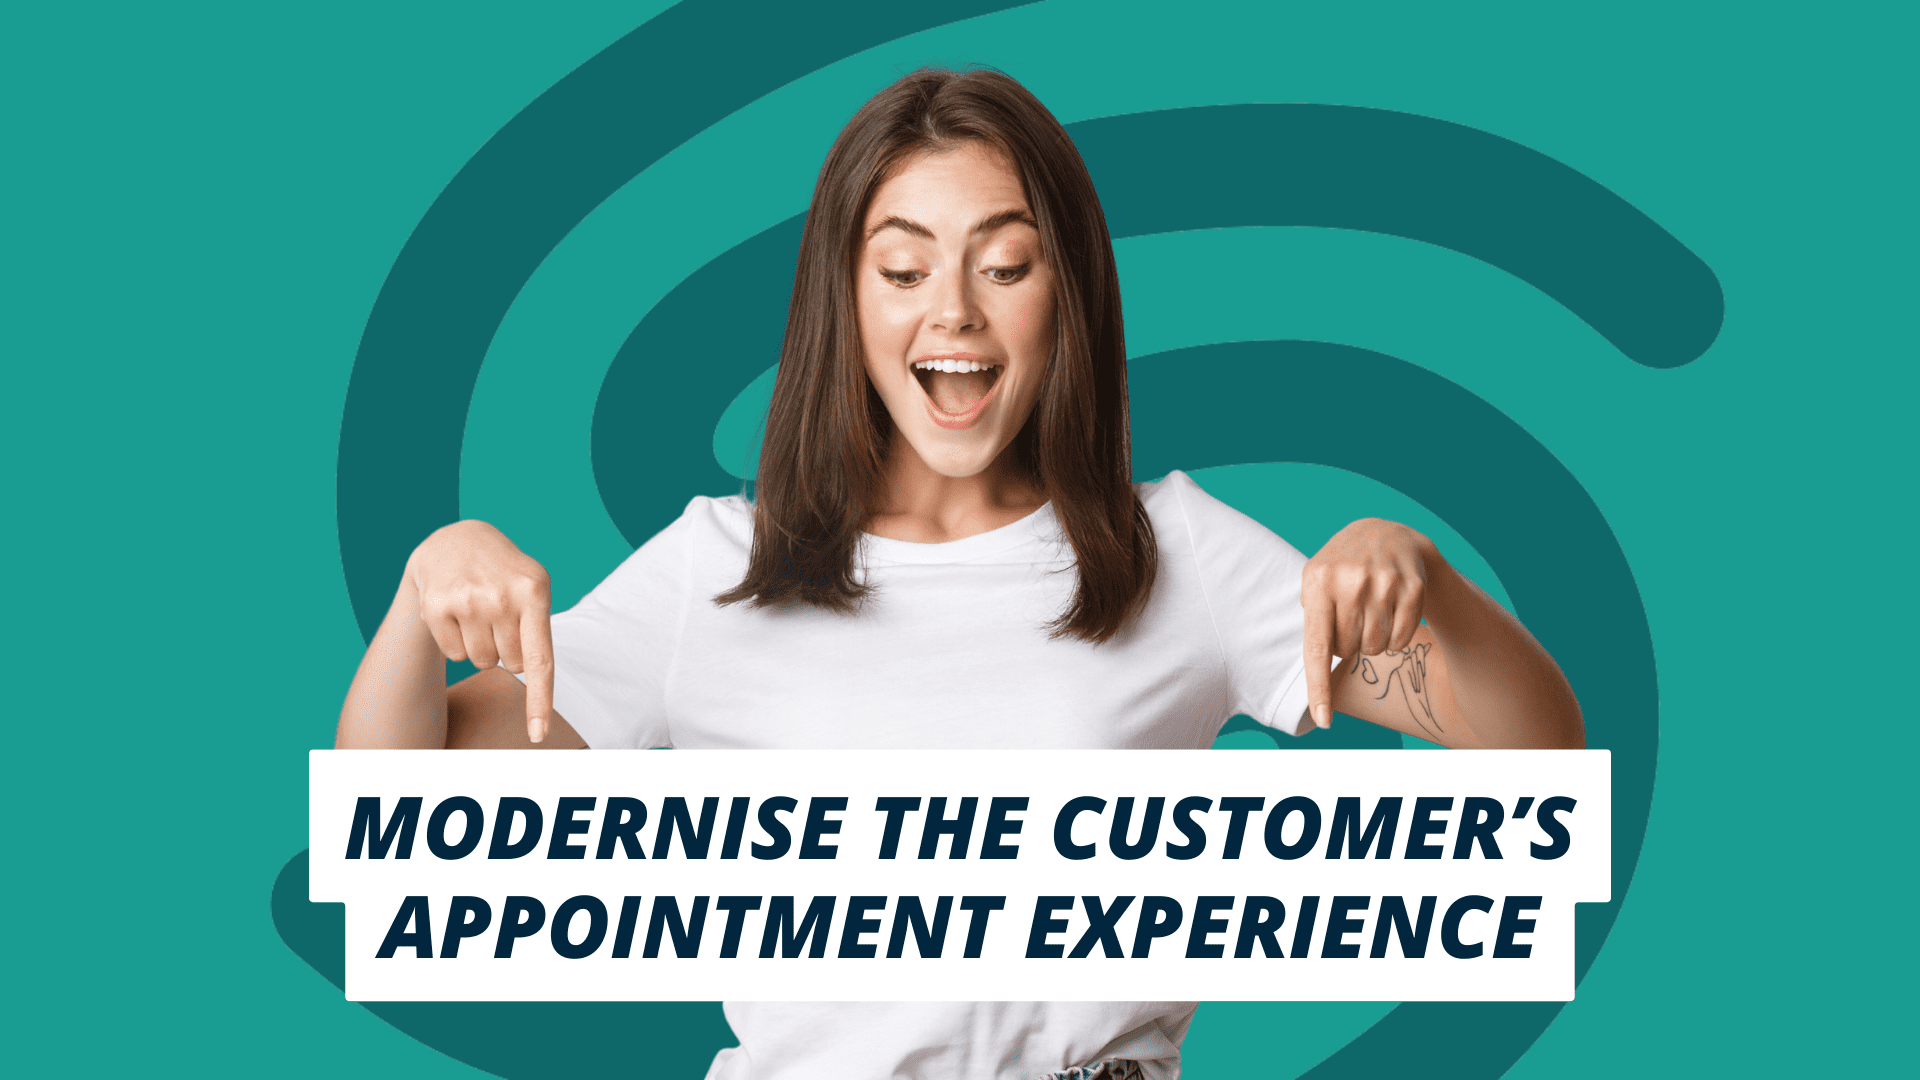 Modernize customer's appointment experience